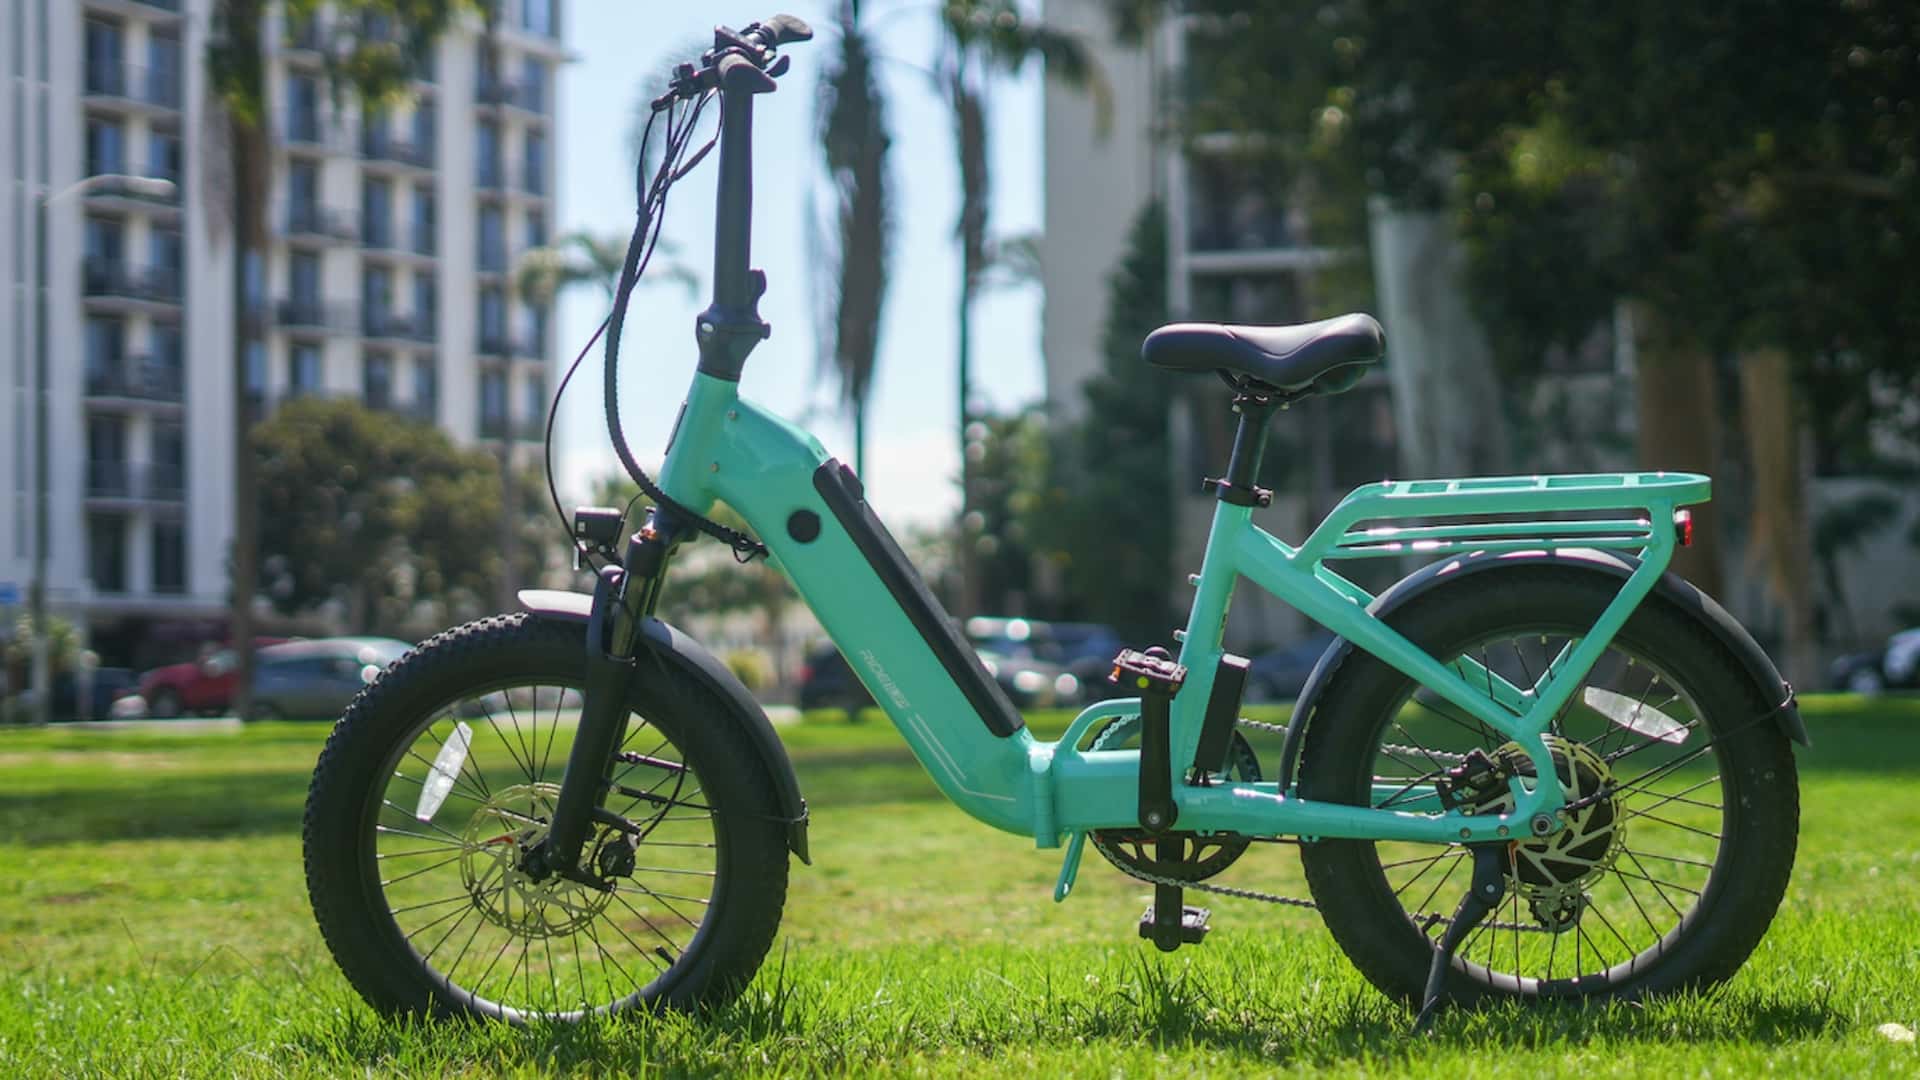 ride1up looks to take e-bike market by storm with super affordable portola